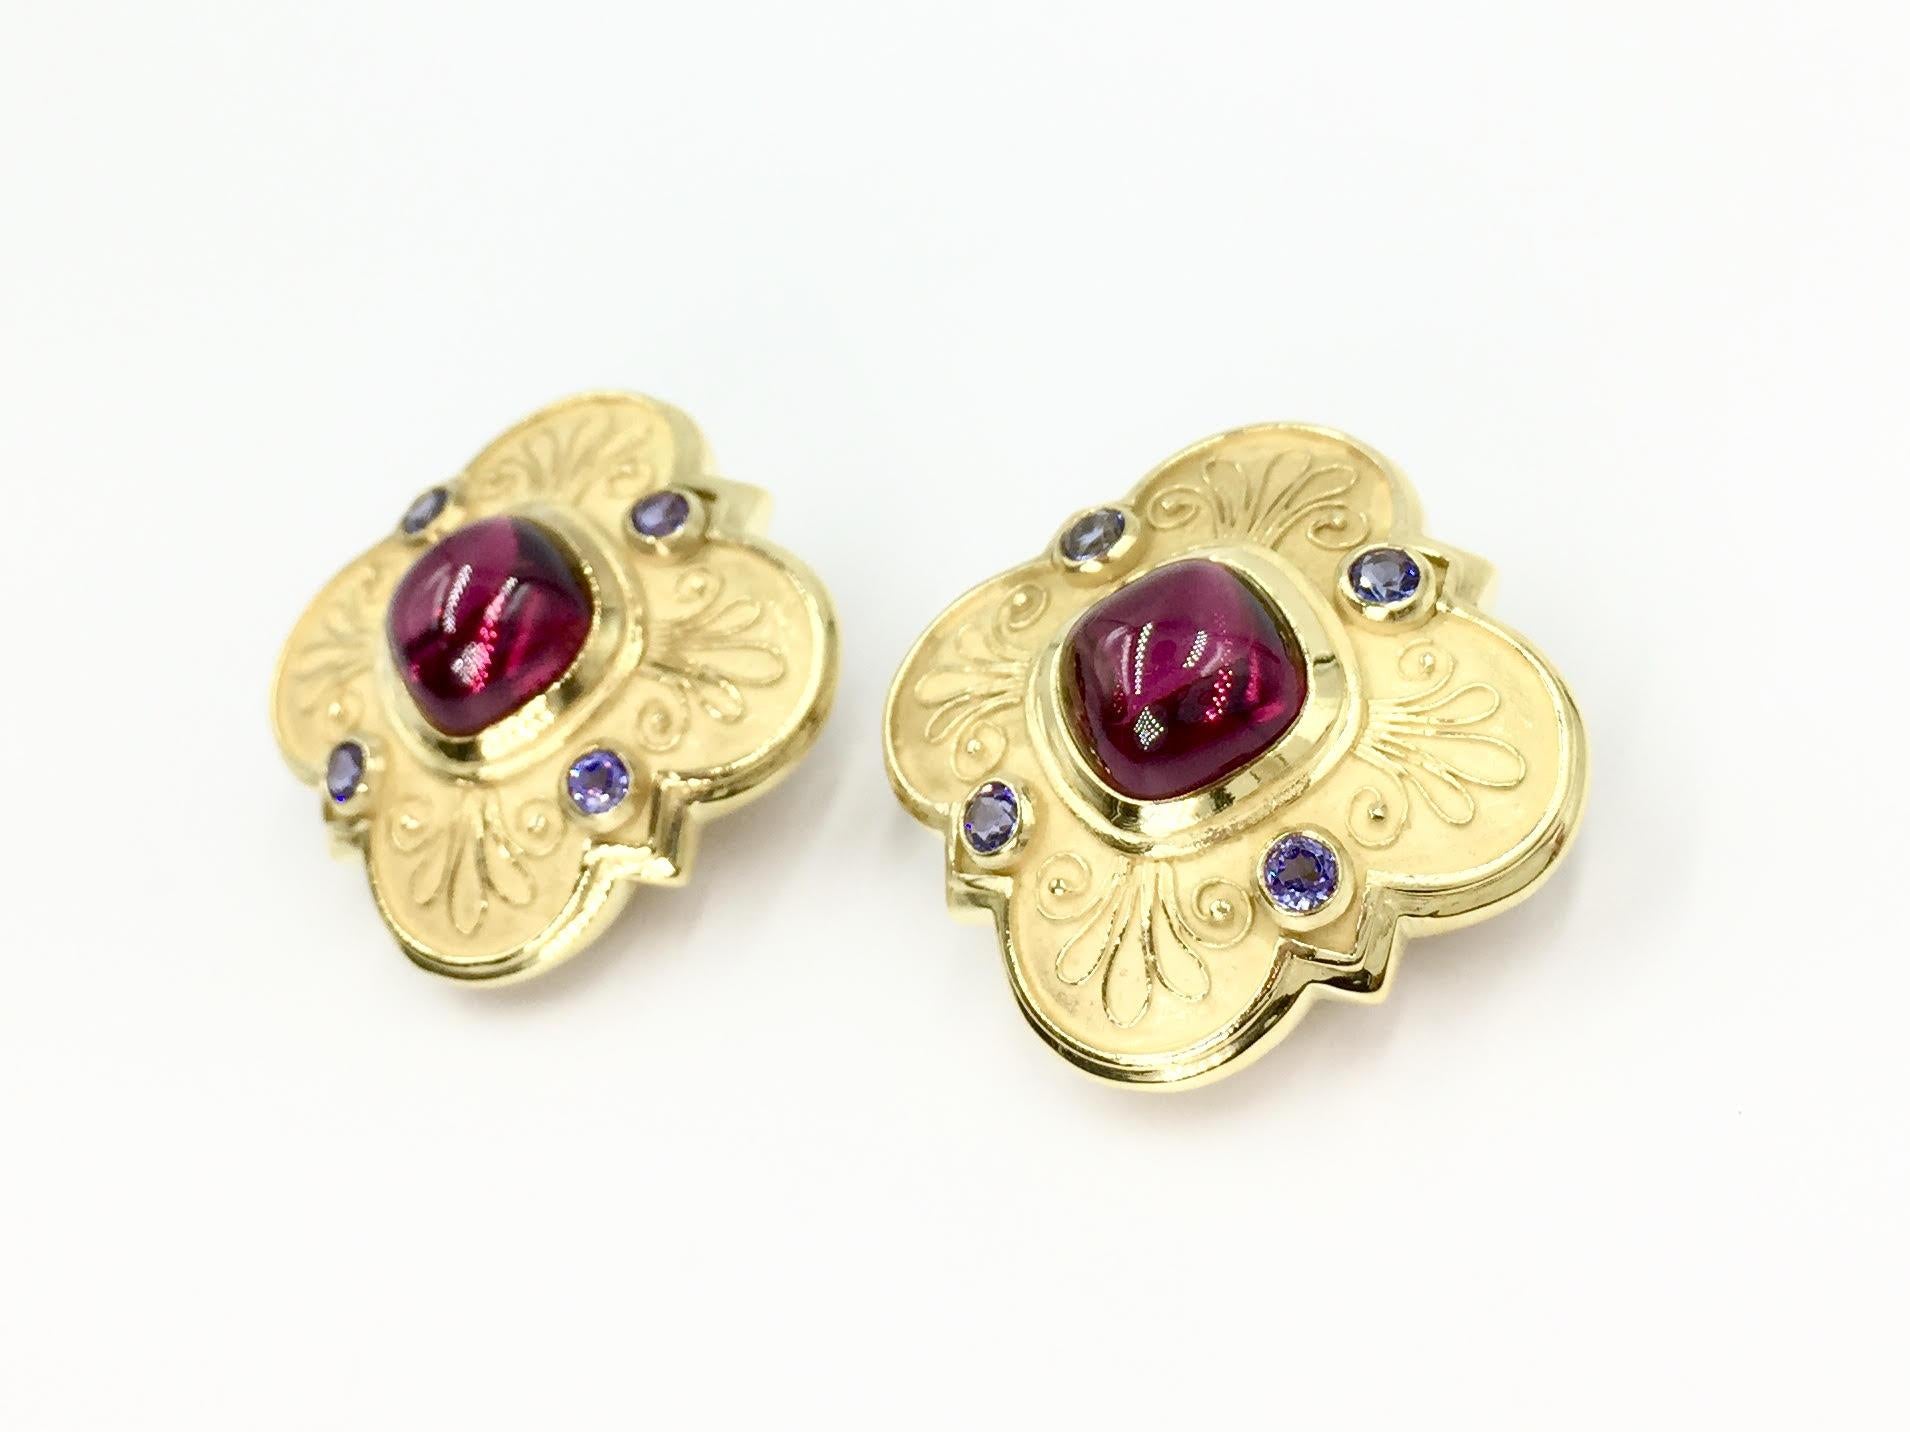 Made with superior quality by Seidengang. These 18 karat yellow gold clover earrings are made in a unique 'barbed quatrefoil' clover shape mixing both brushed and polished gold for dimension. Center is set with a vivid cabochon reddish-pink